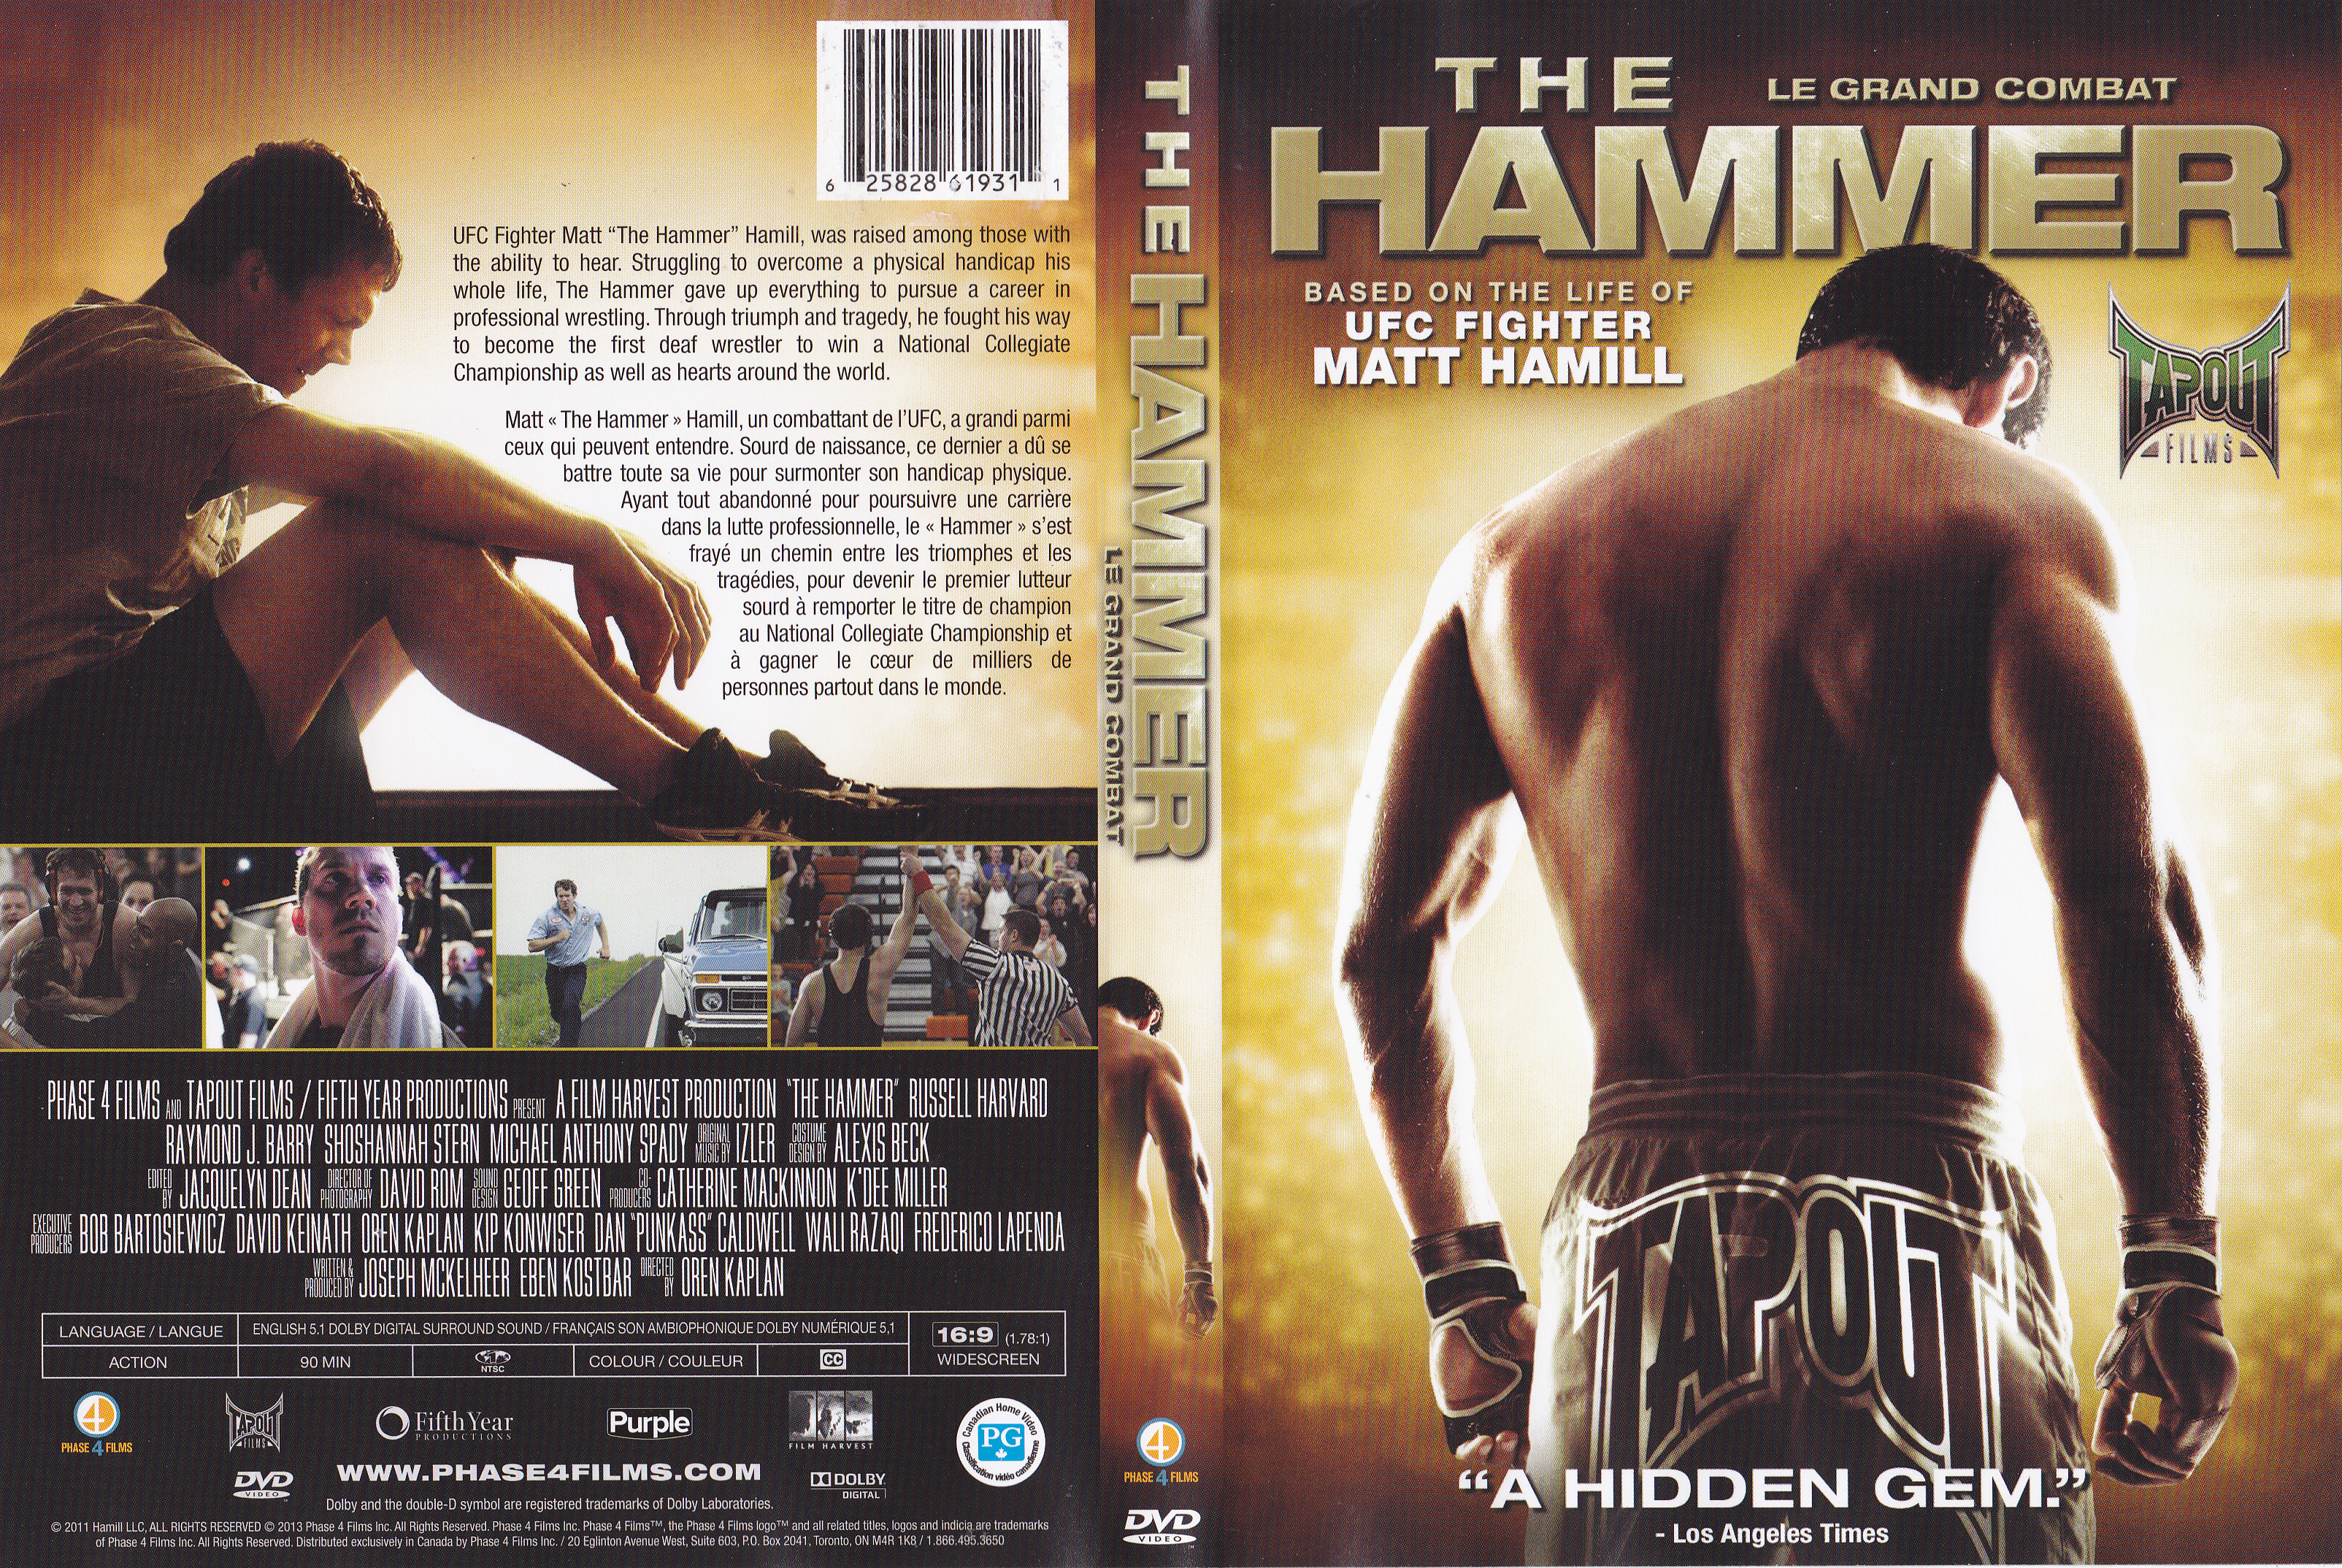 Jaquette DVD Le grand combat - The hammer (canadienne)